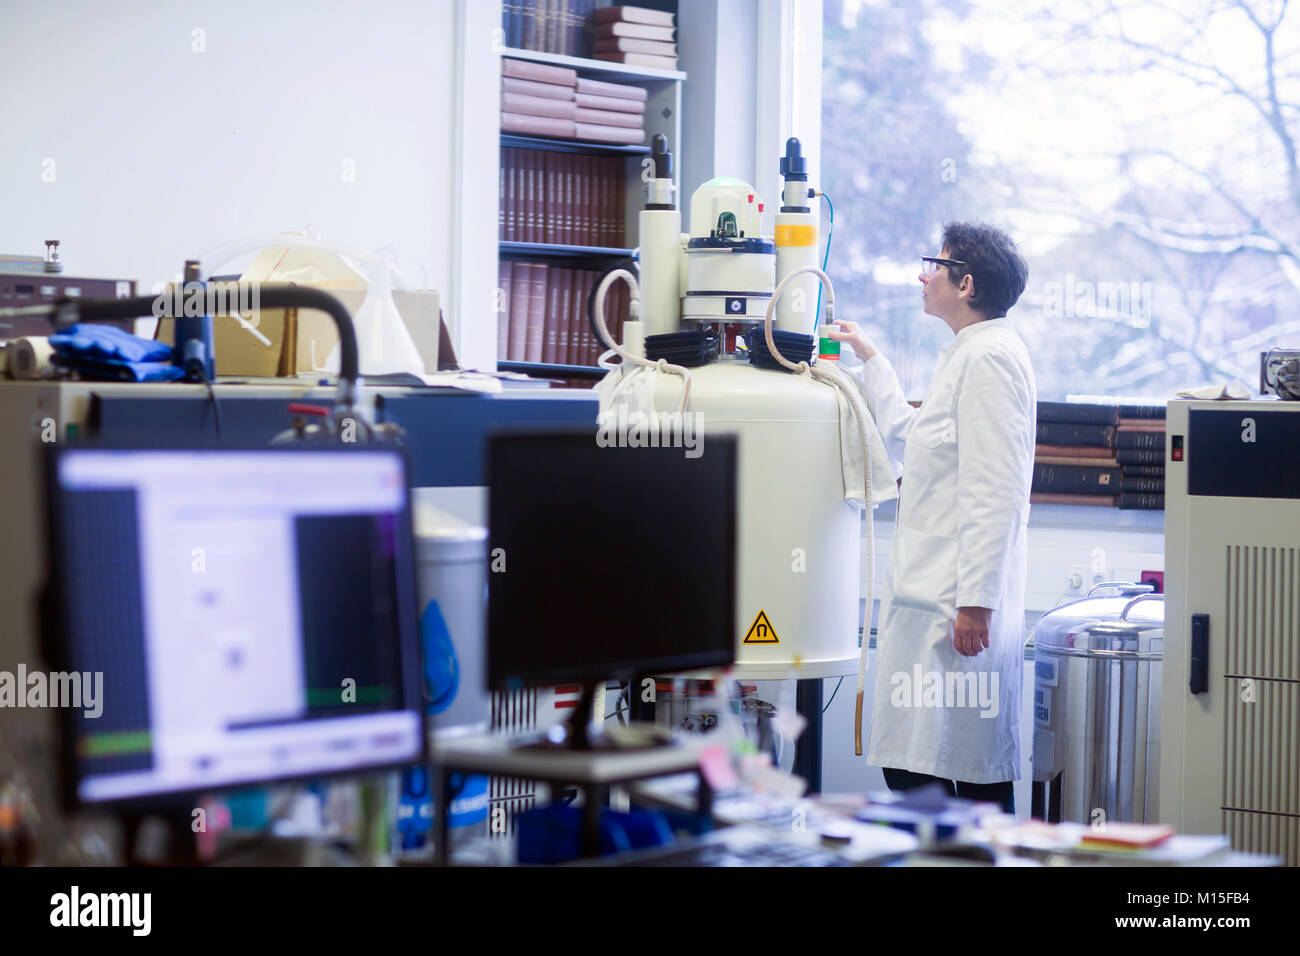 Chemist using an NMR (nuclear magnetic resonance) spectrometer in a pharmaceutical laboratory. Stock Photo